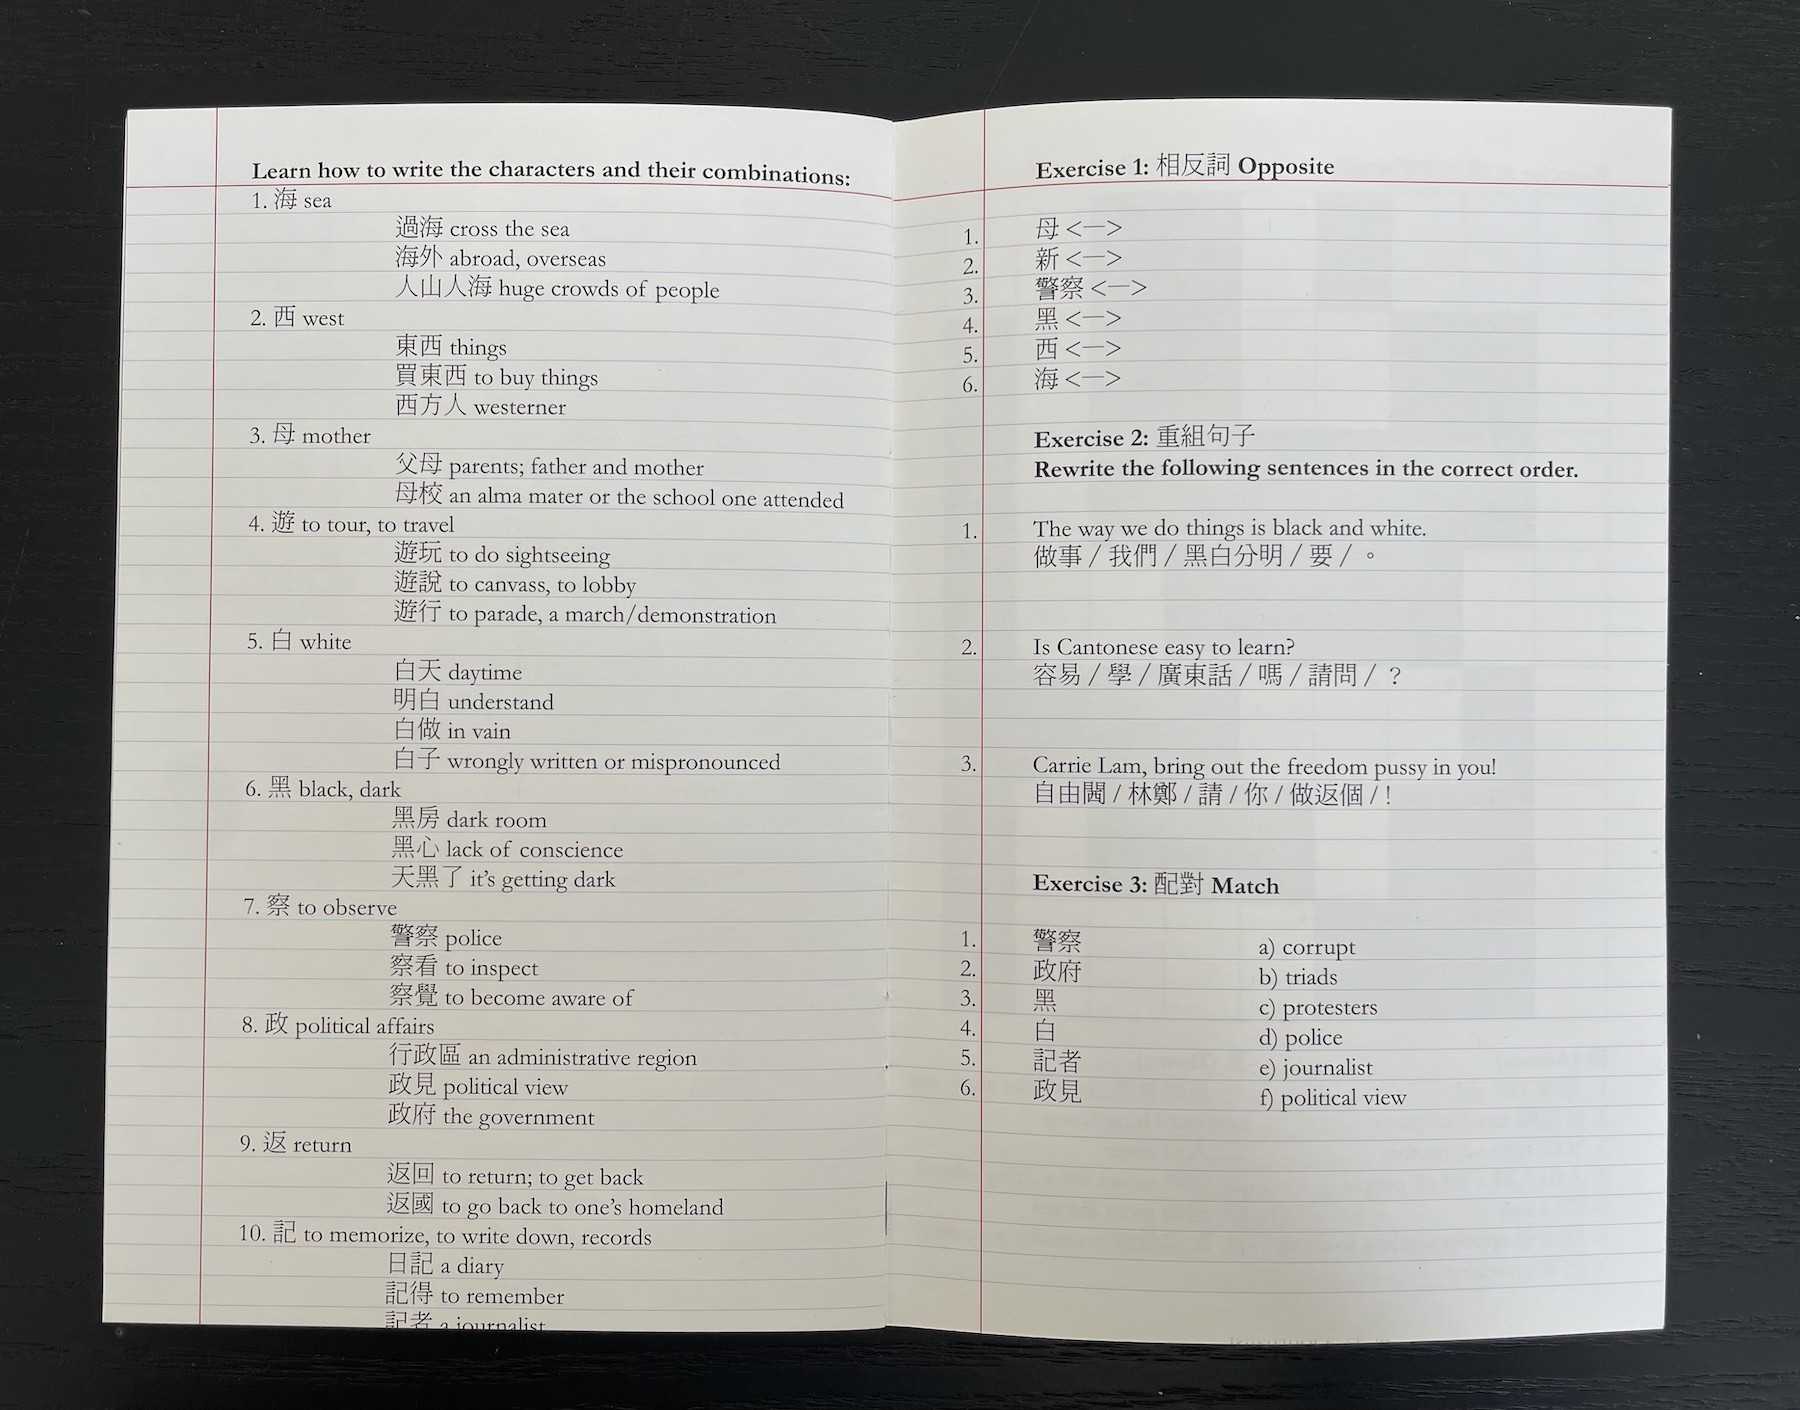 An open-faced zine shows two pages of mini workbook sections on red-and-blue lined paper. Exercises include: matching opposite words, rewriting sentences in the correct order, and matching correlating words. 